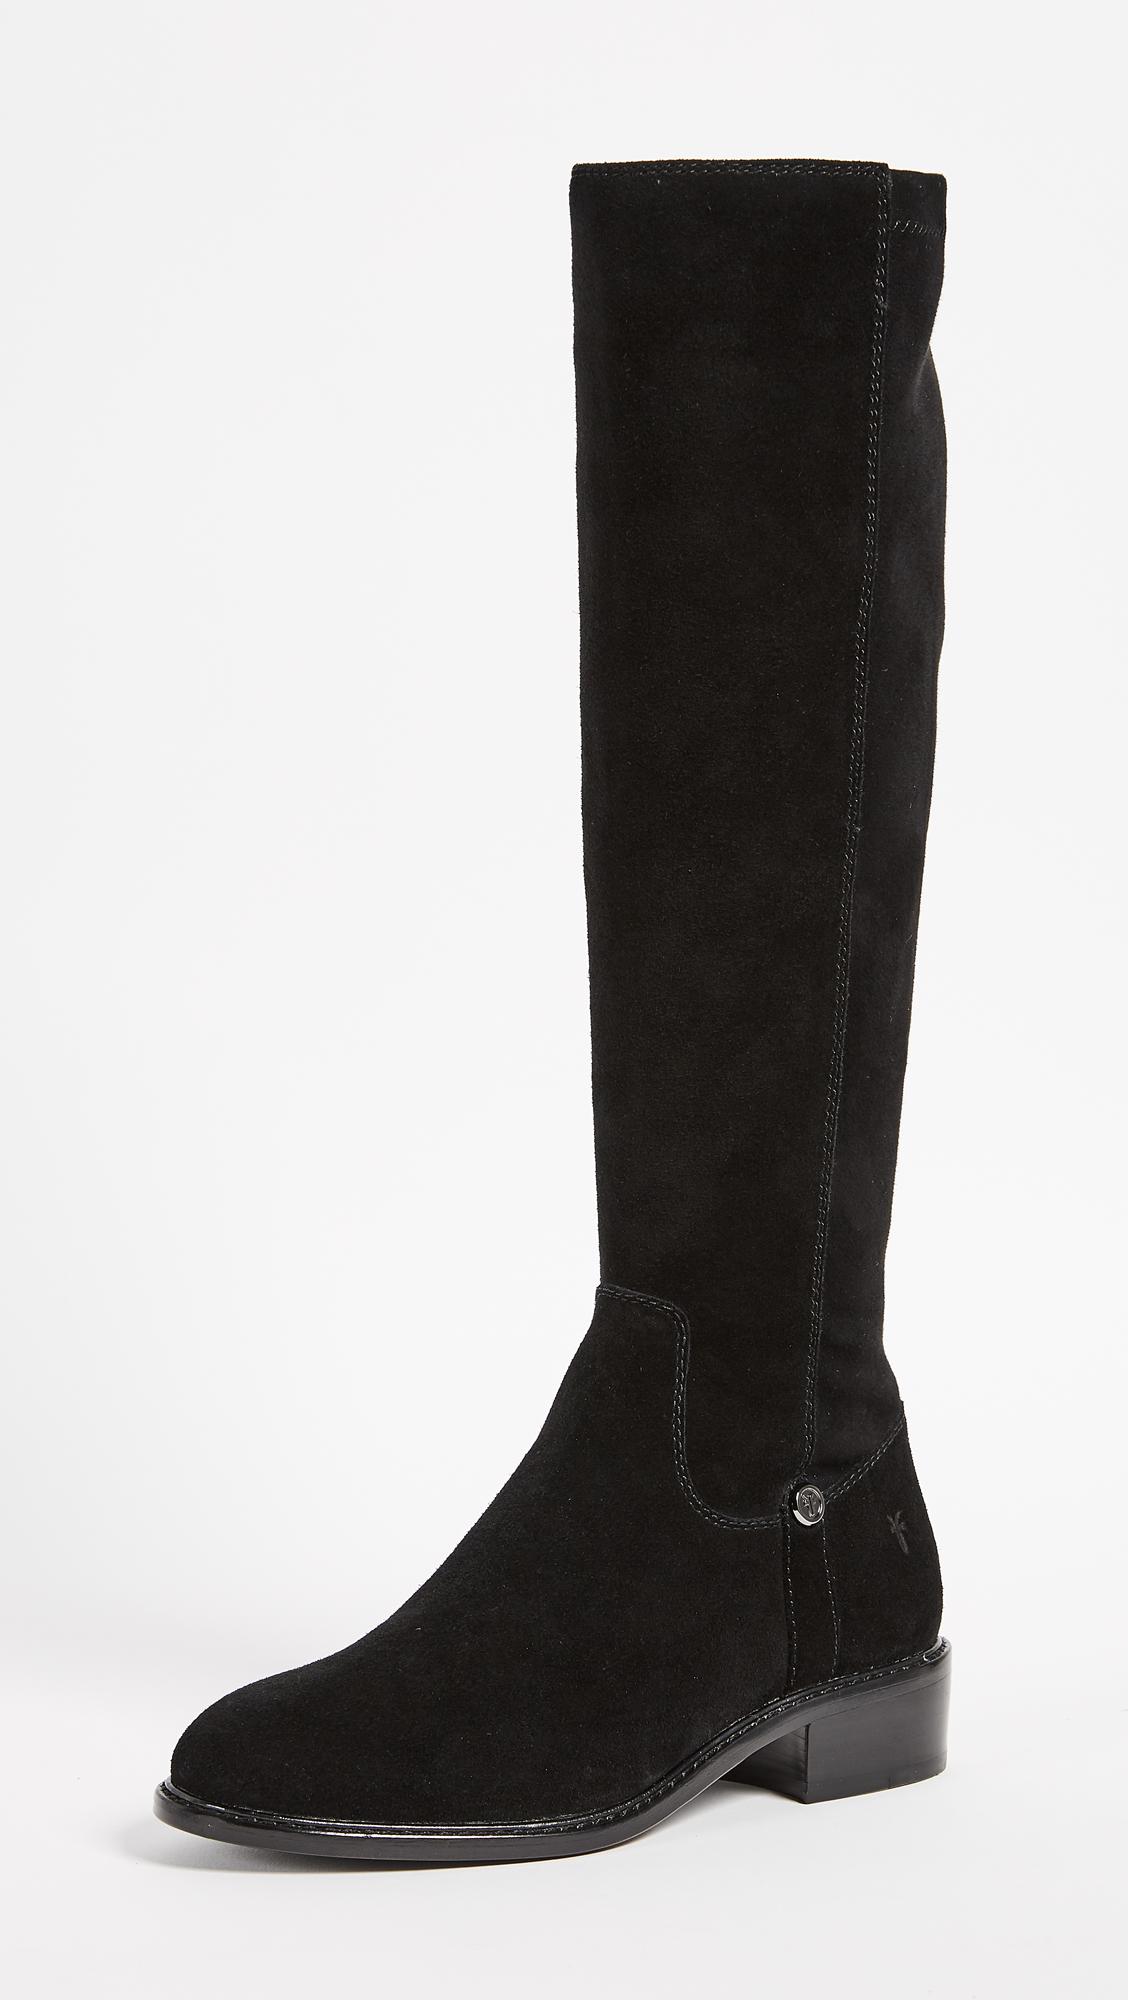 Frye Suede Taylor Stretch Tall Boots in Black - Lyst